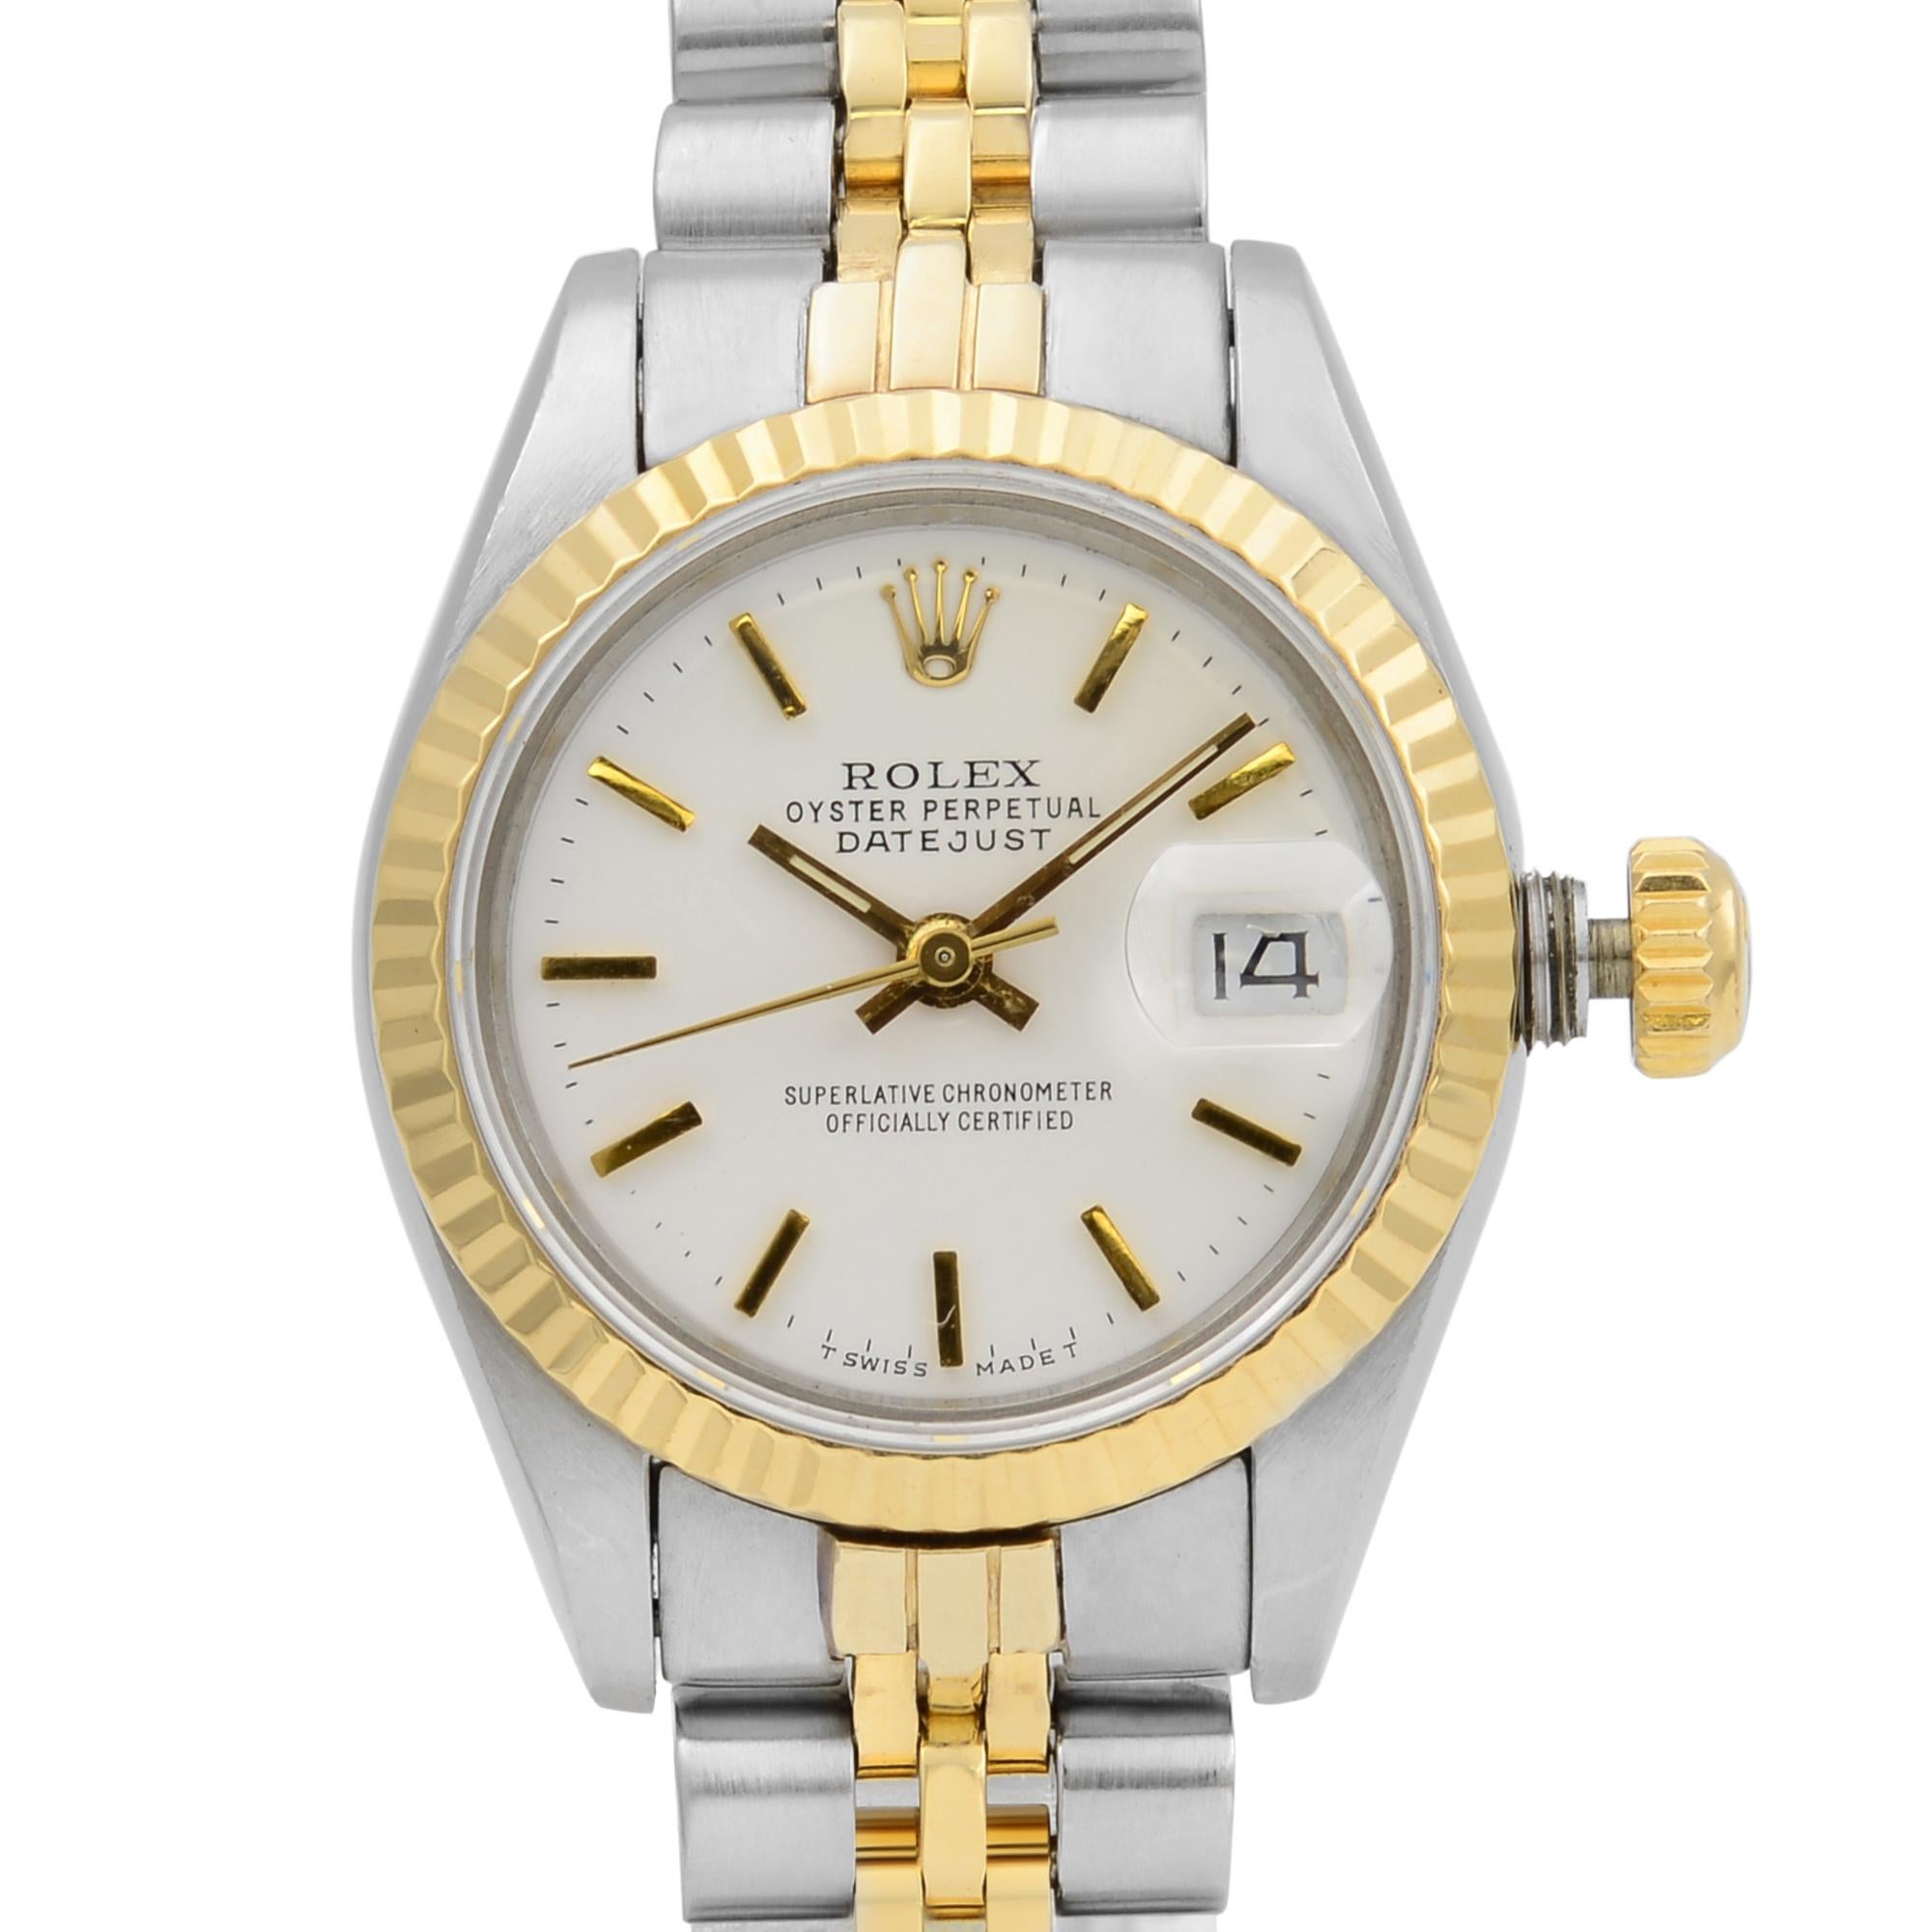 This pre-owned Rolex   is a beautiful  timepiece that is powered by mechanical (automatic) movement which is cased in a stainless steel case. It has a round shape face,  dial and has hand  style markers. This watch comes with a Chronostore